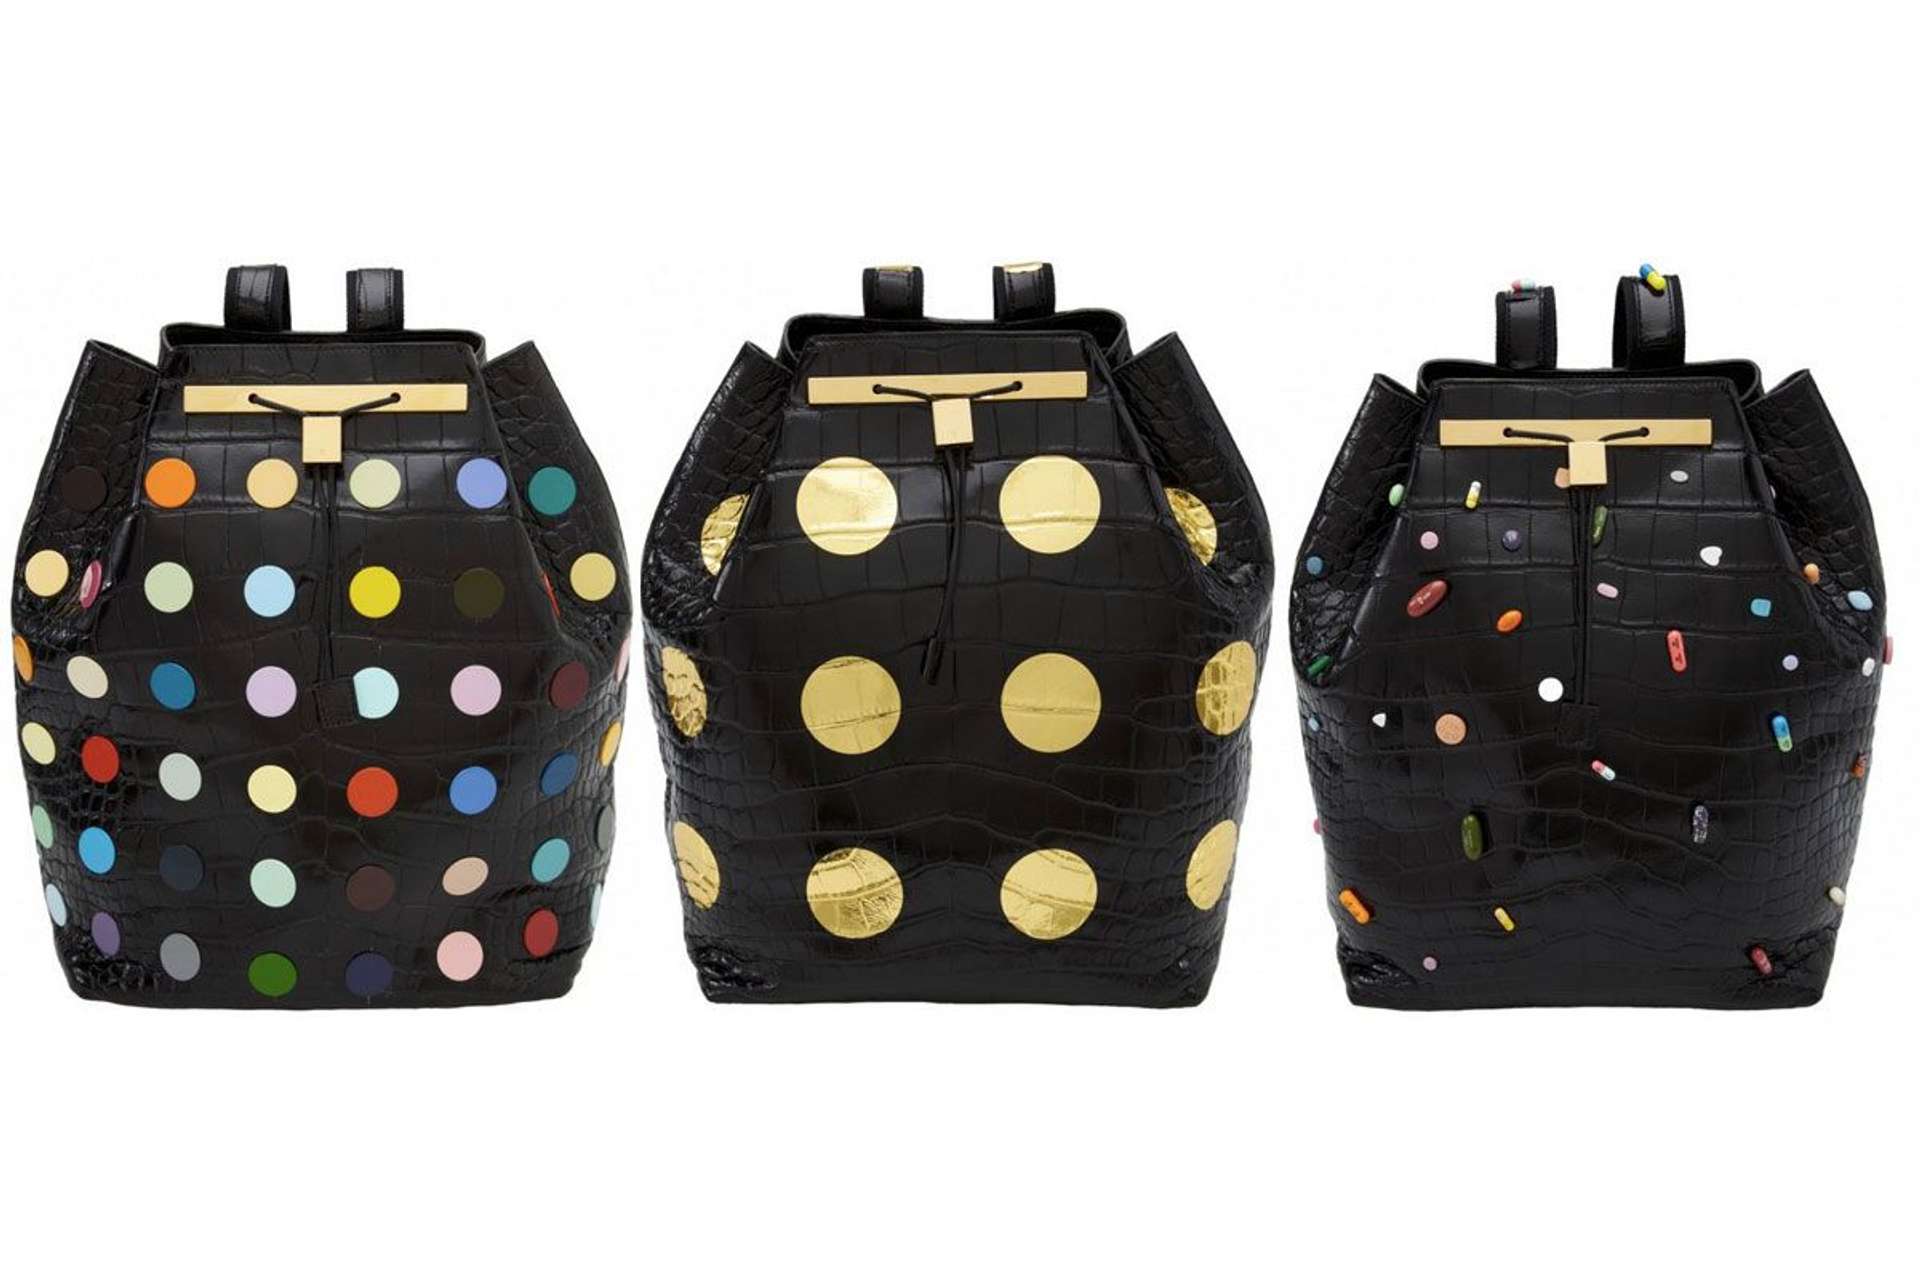 An image of three black backpacks in different designs by Damien Hirst for fashion house The Row.